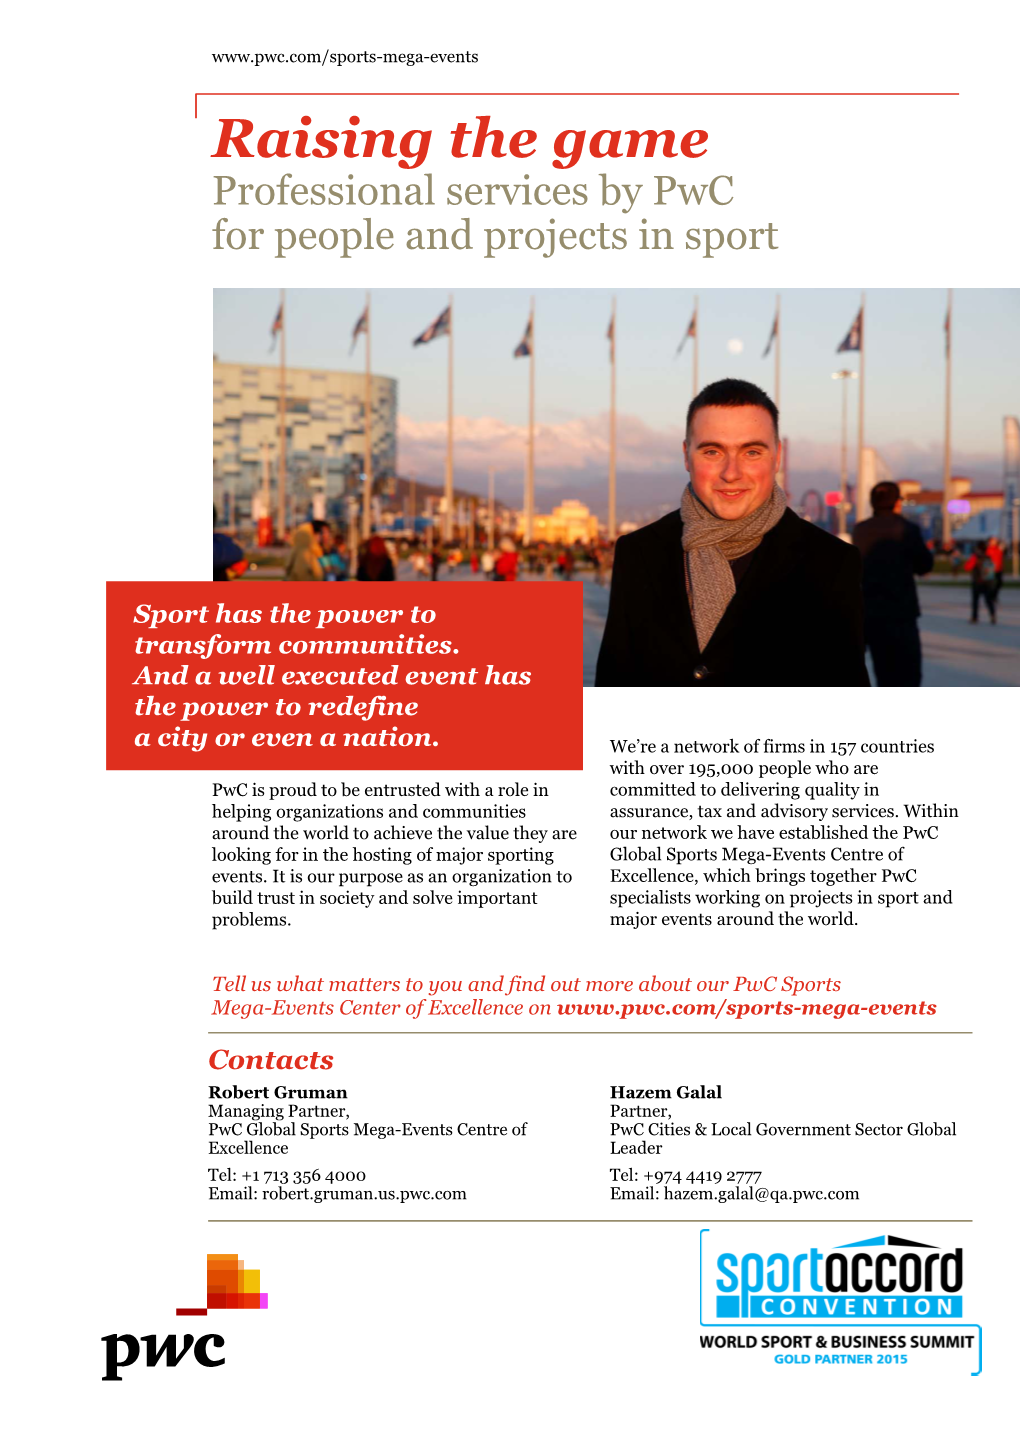 Professional Services by Pwc for People and Projects in Sport